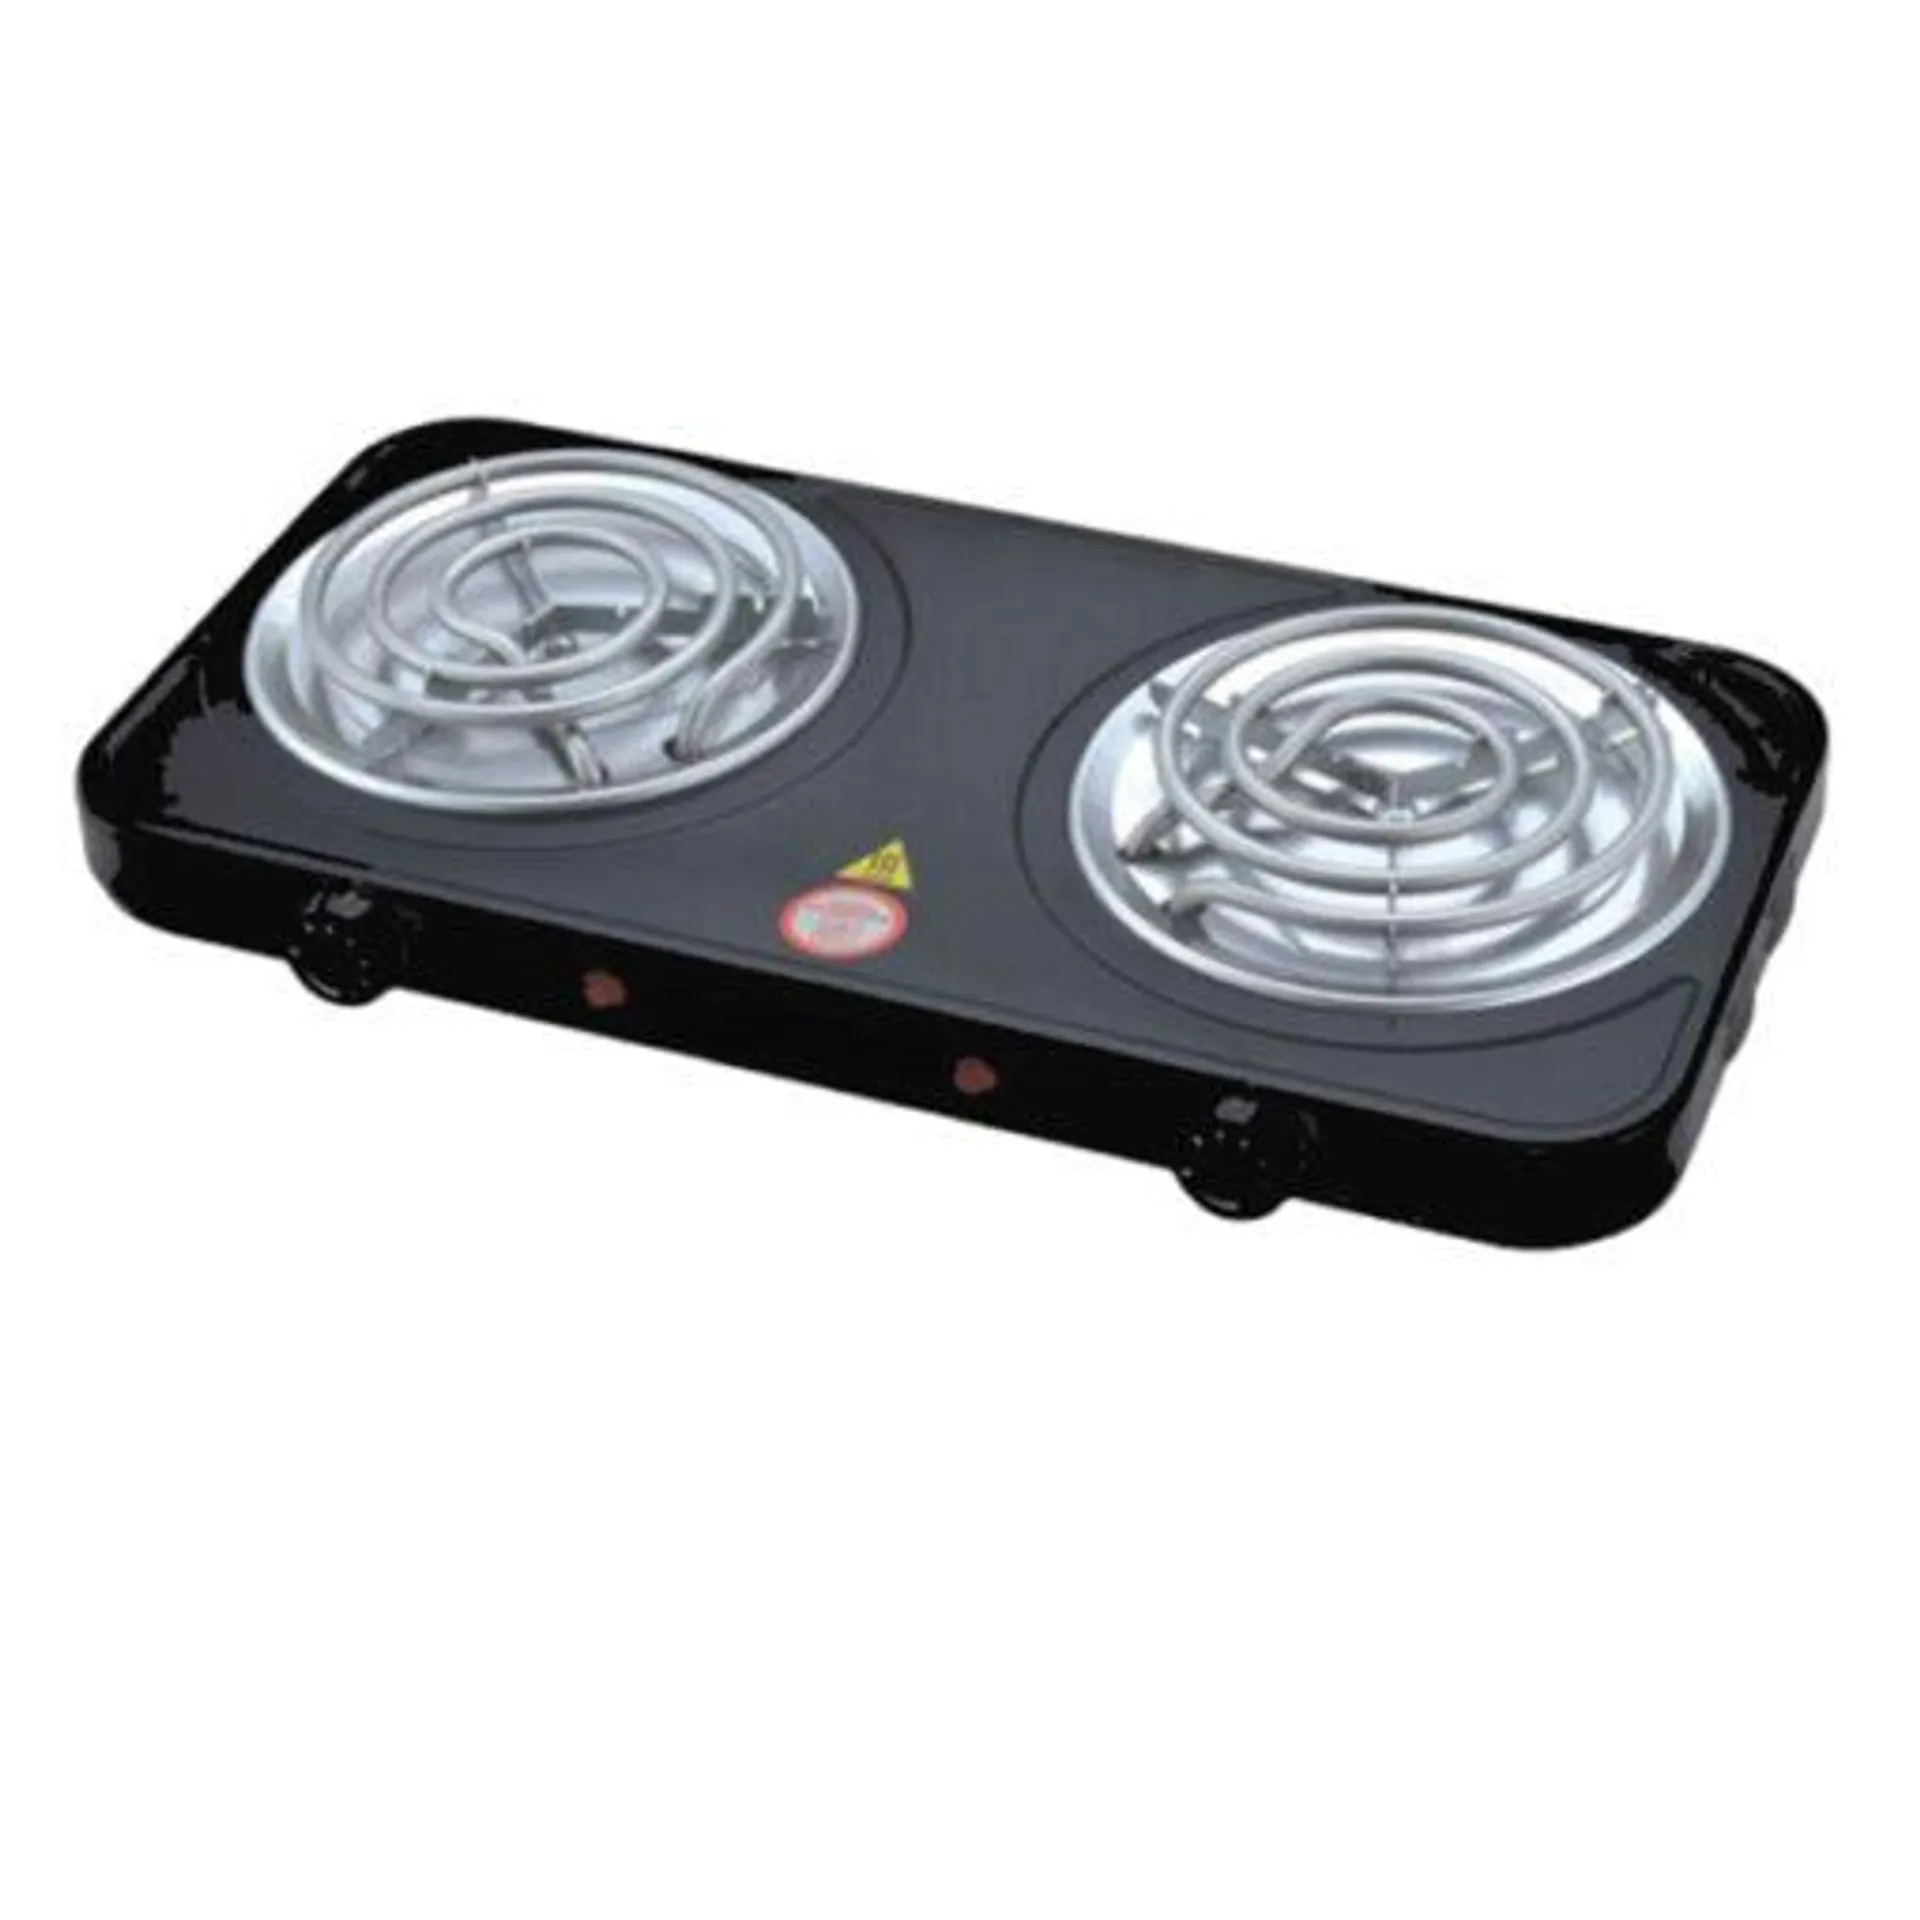 VALUEHOME – 2 Plate stove